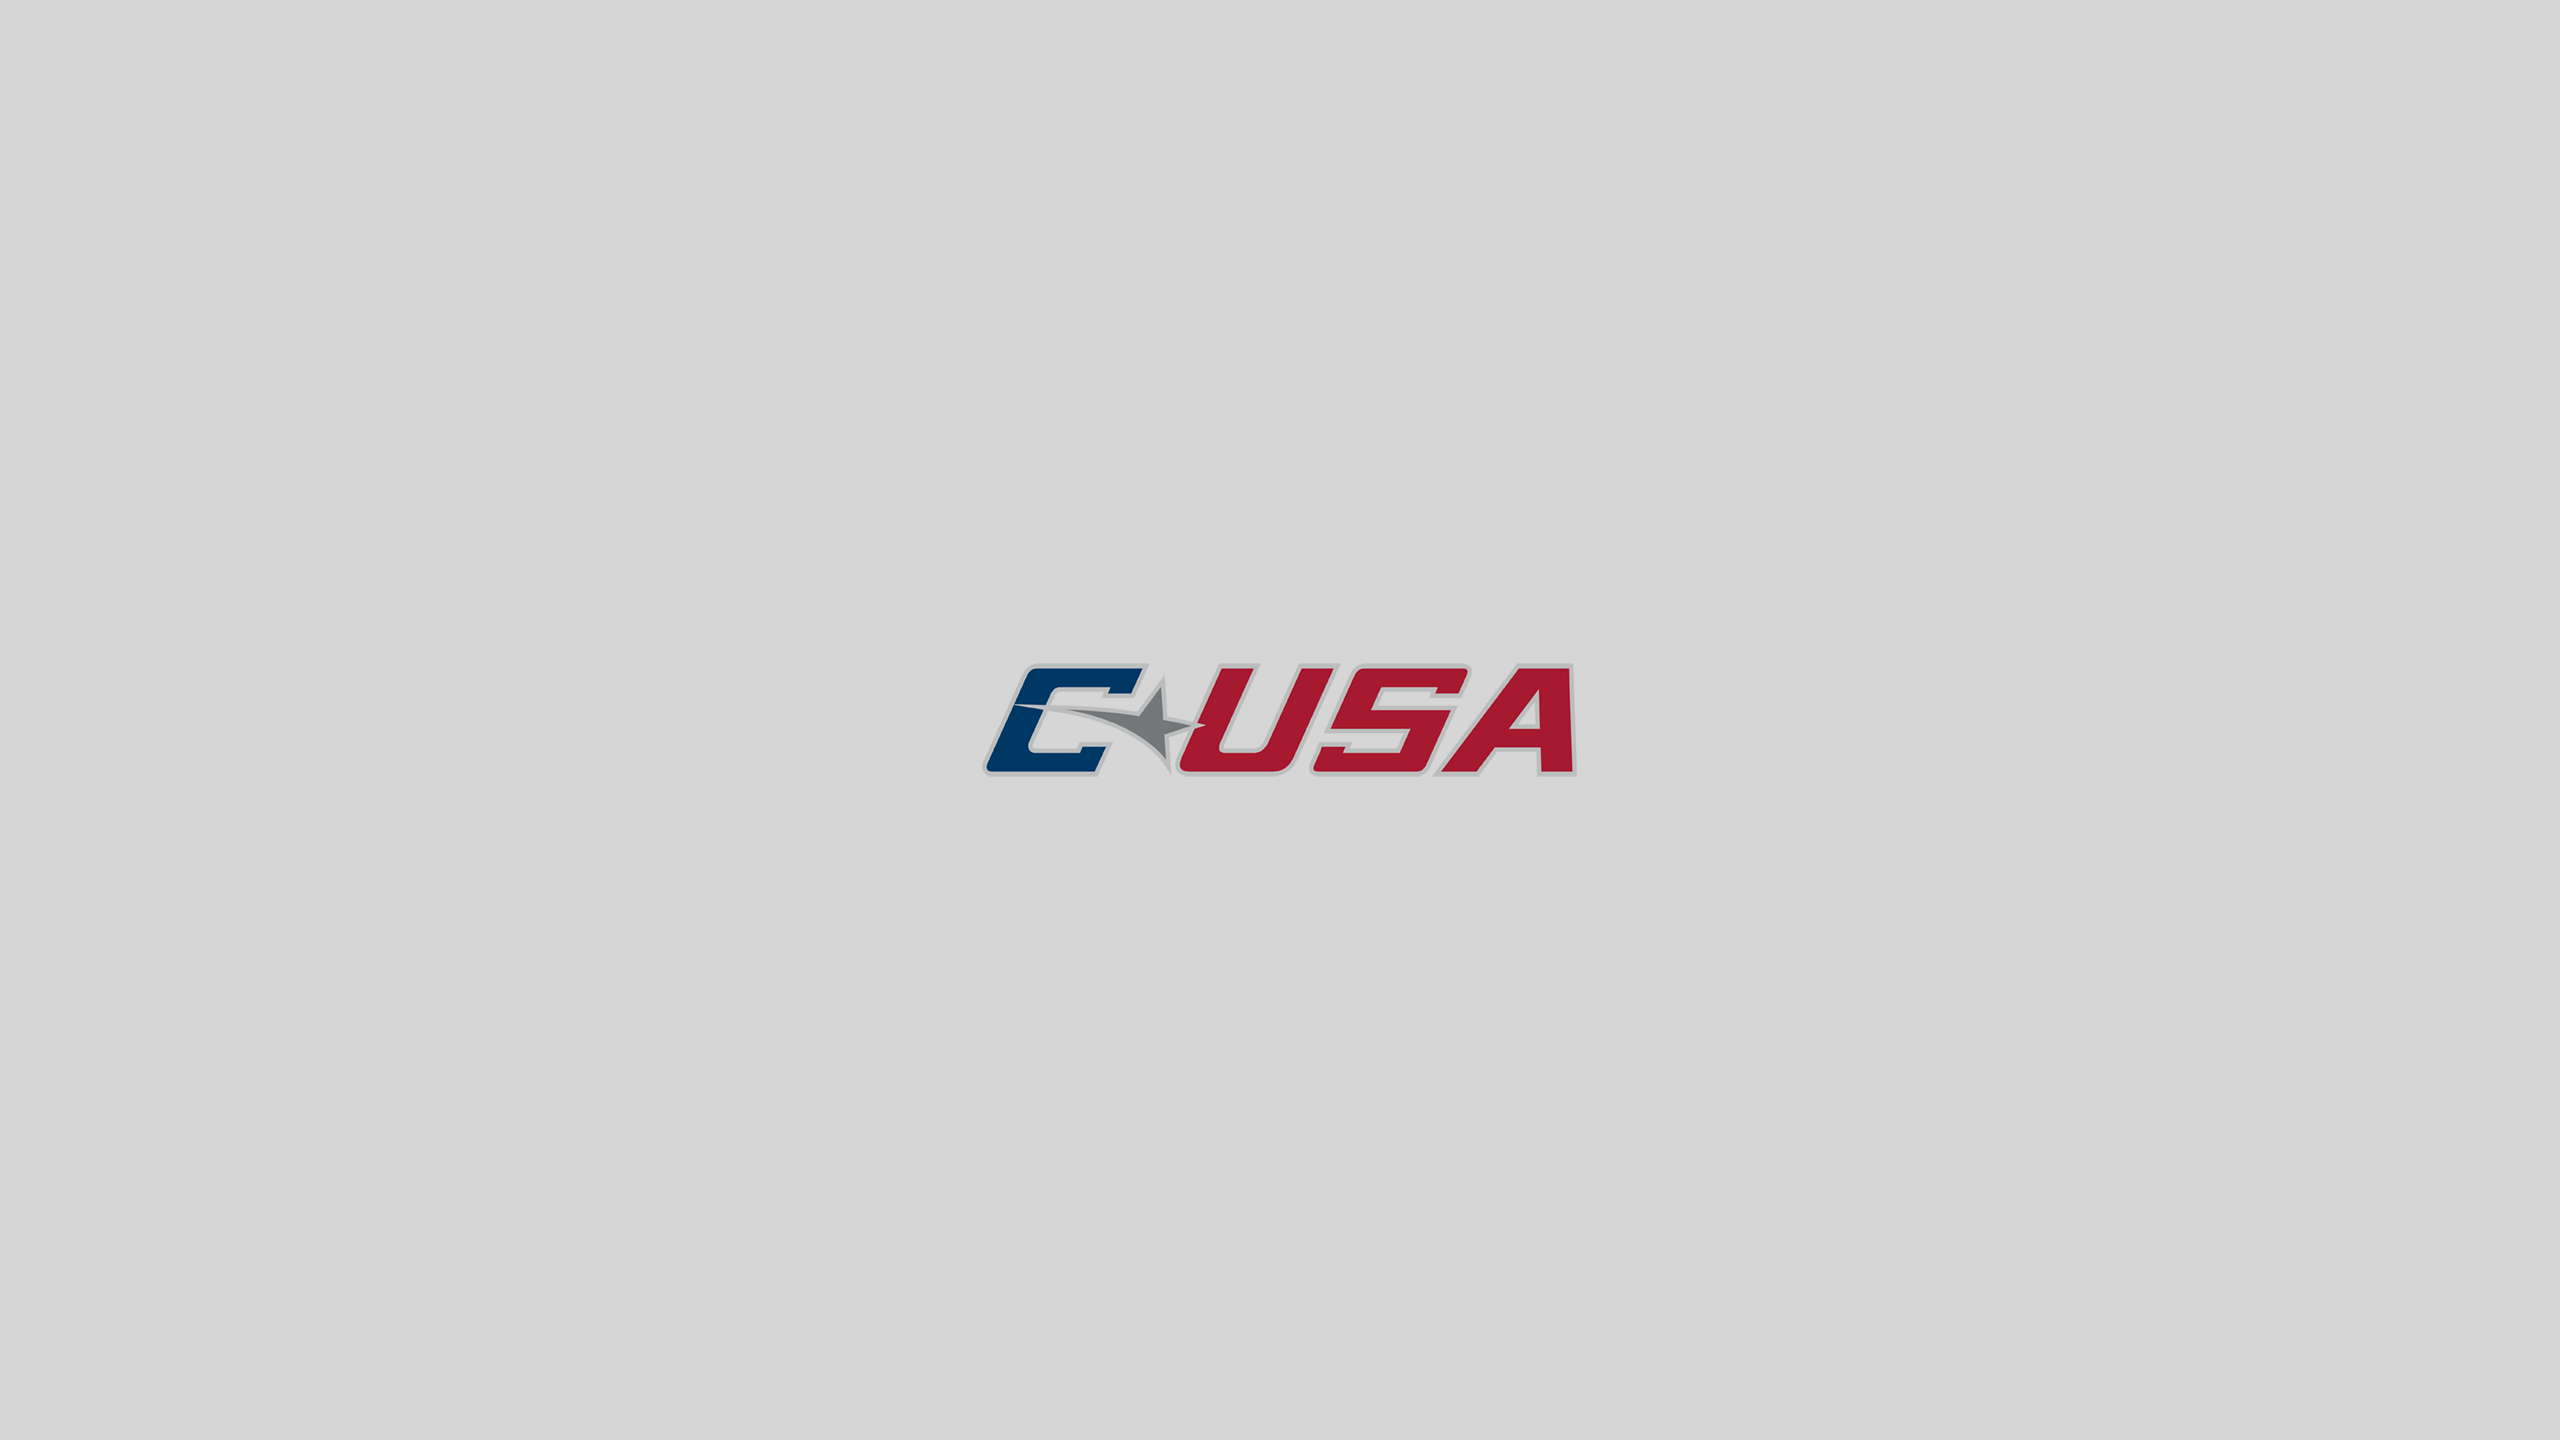 Conference USA - NCAAF - Square Bettor